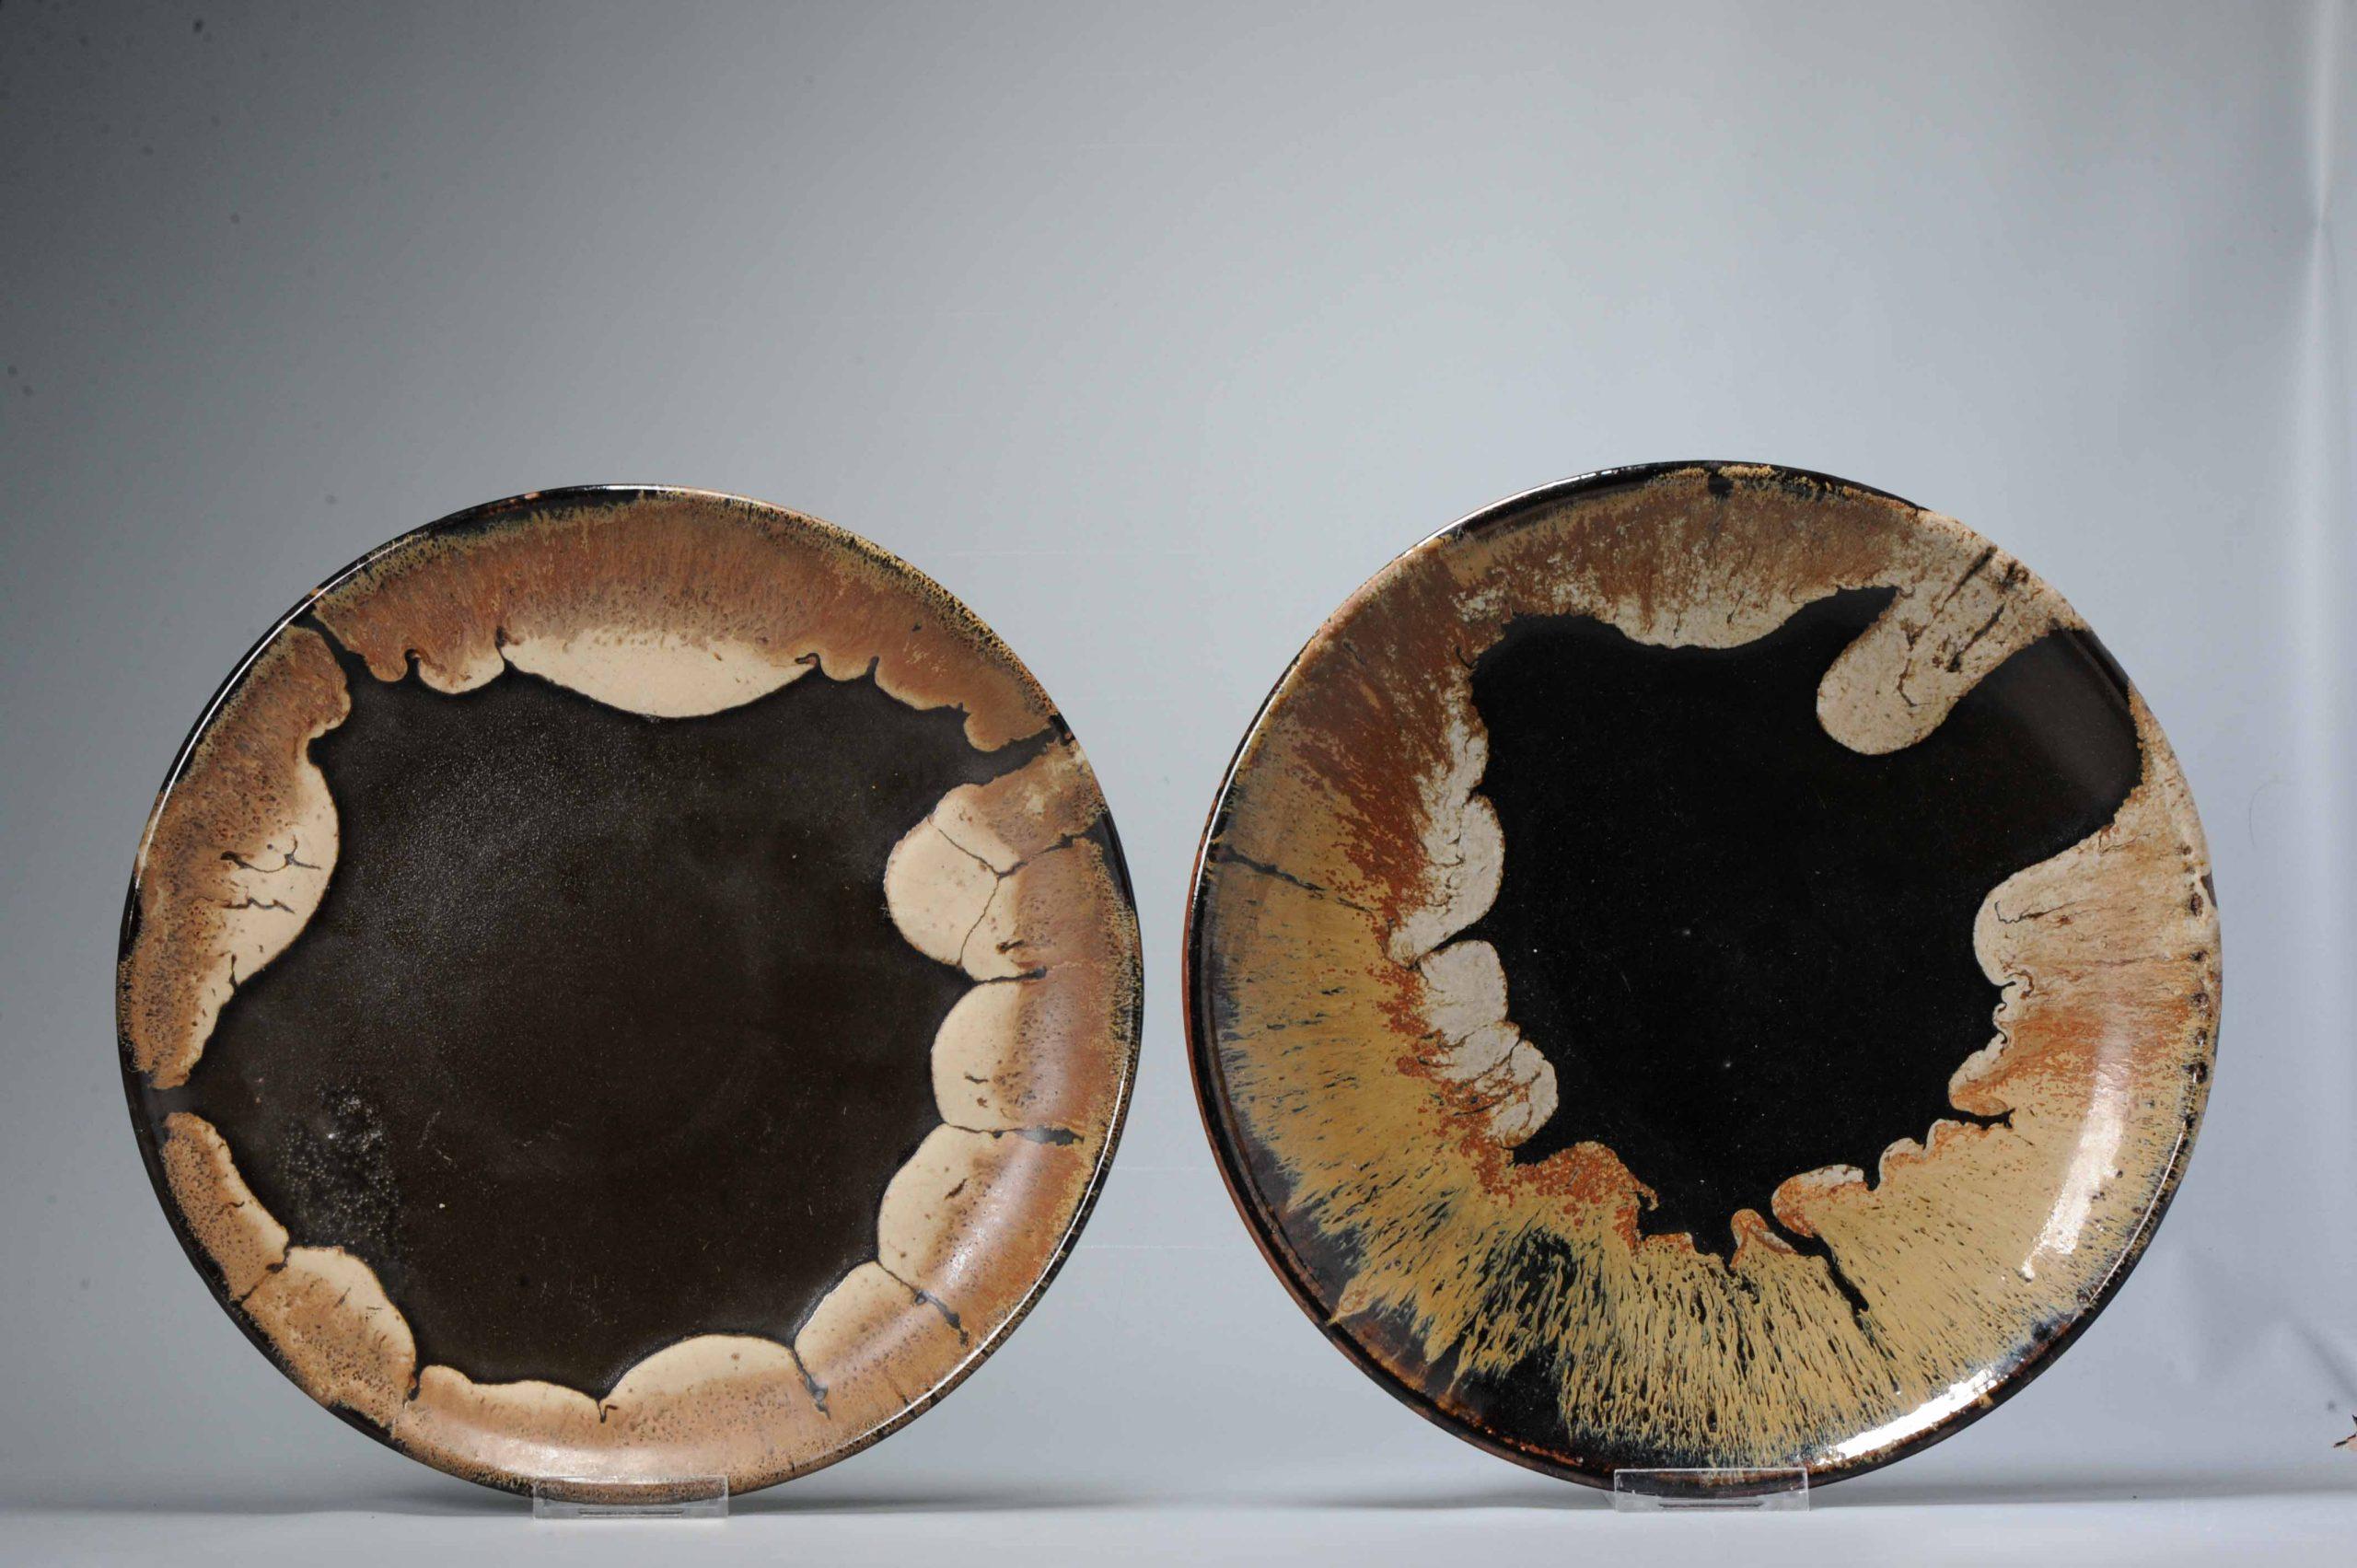 Two Japanese earthenware Tamba-tachikui dishes with abstract decoration, one dish signed, third quarter 20th century -Diameter 31.5 cm-
Tamba-tachikui ware (called Tamba-tachikui yaki in Japanese) is a form of pottery produced around Konda in the